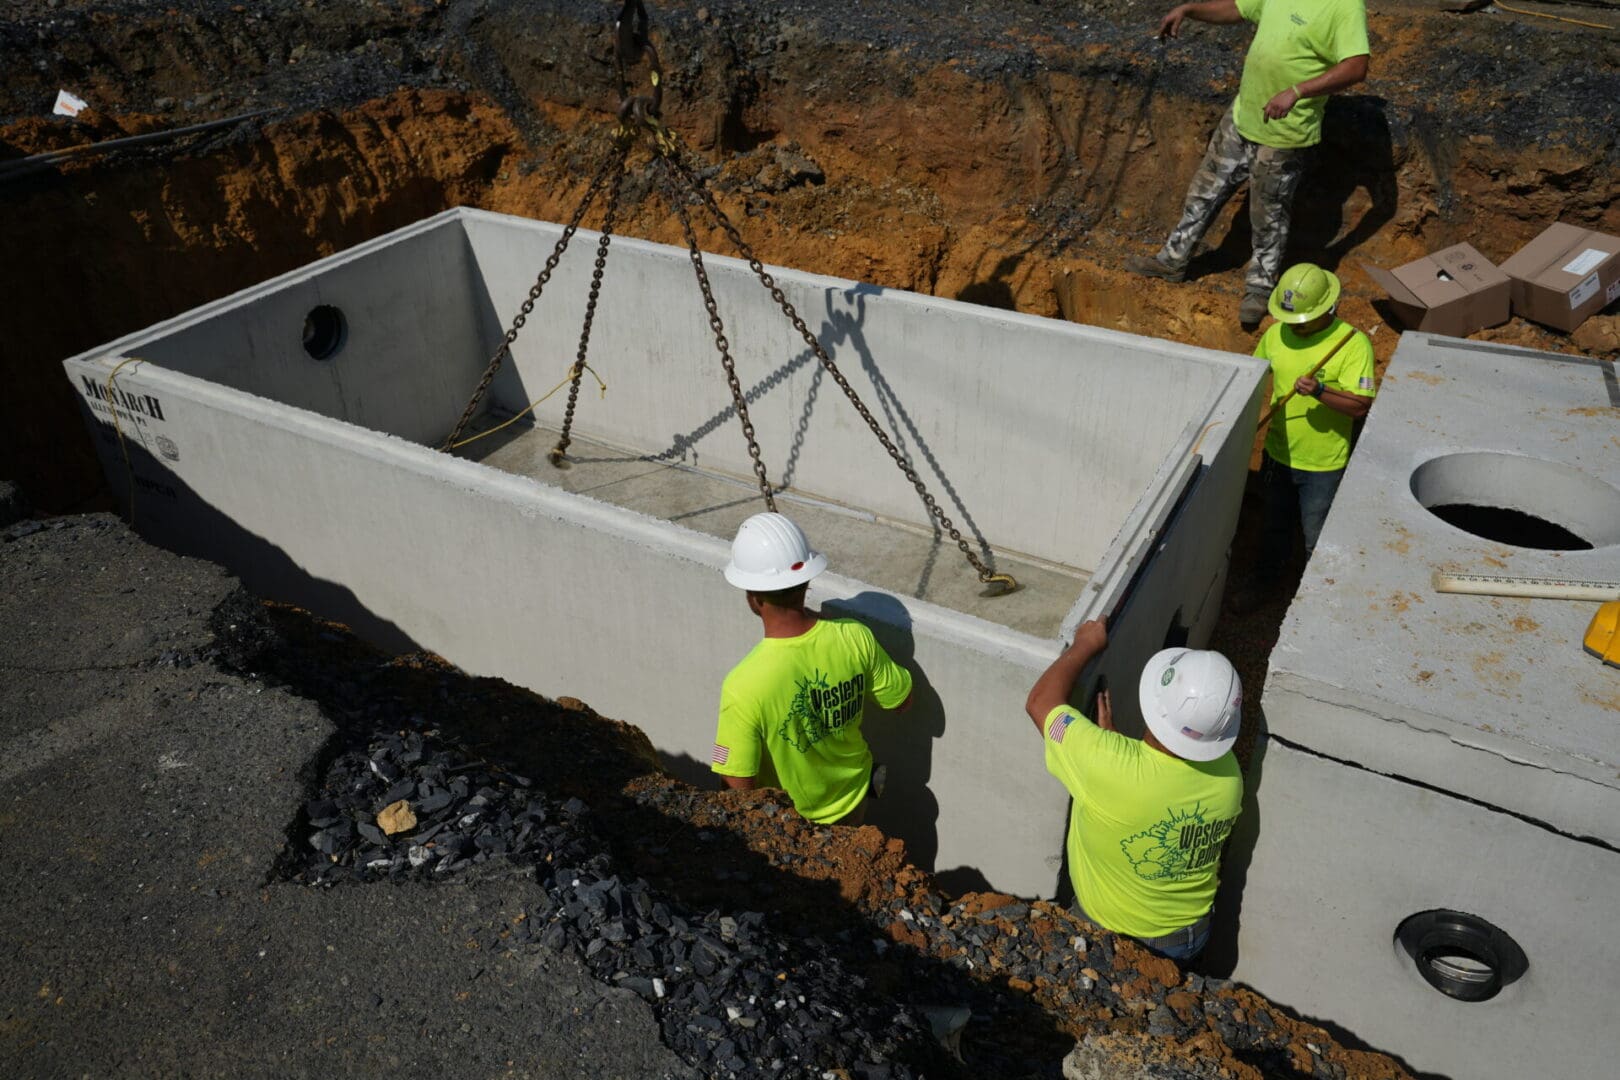 A group of construction workers engaged in site work on a concrete slab.